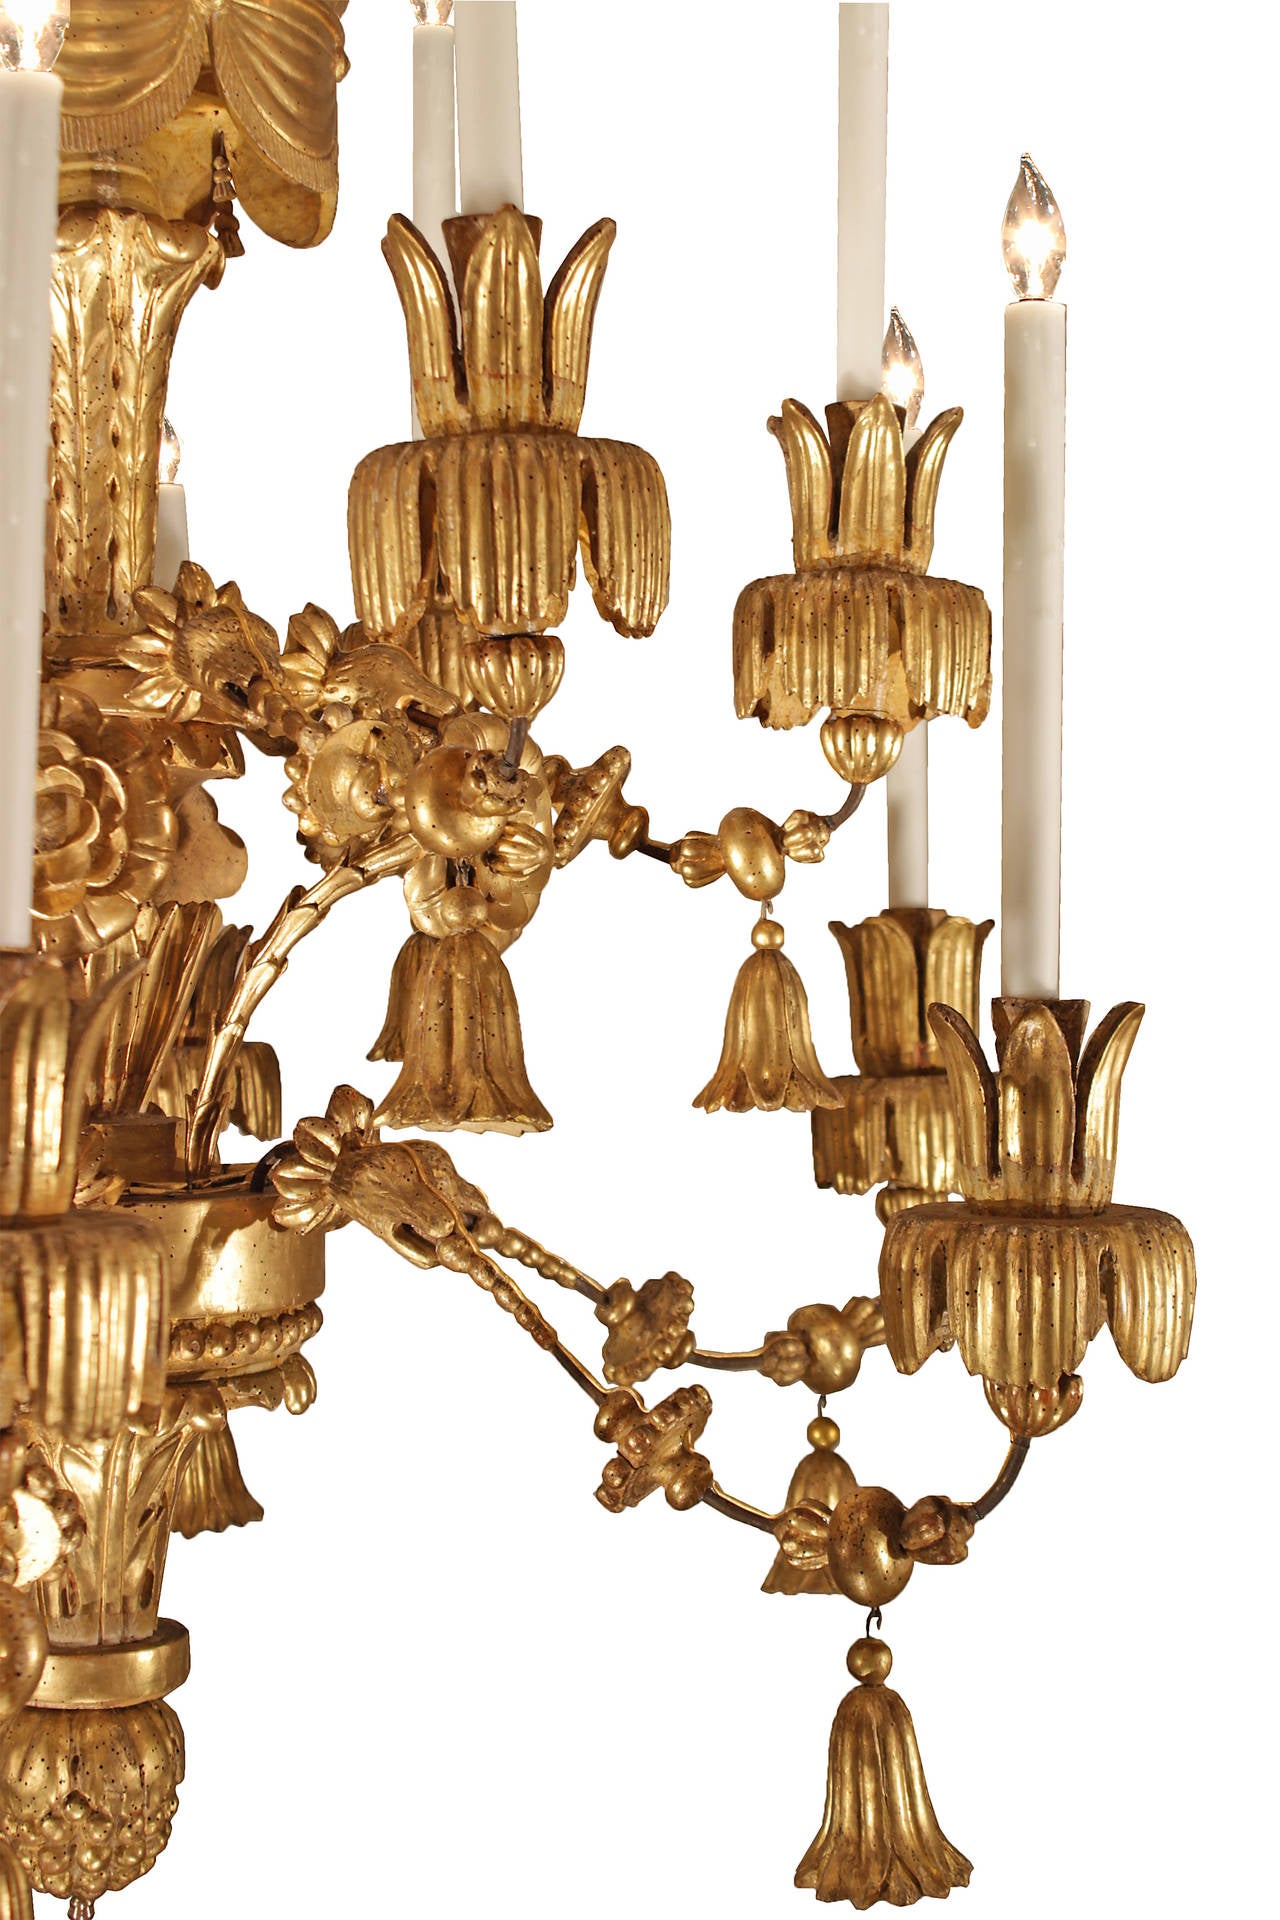 A stunning and large scale Italian early 18th century carved giltwood  twelve light chandelier circa 1730. The chandelier is centered by a carved bottom floral finial with a tassel pendant. The bottom tier of the central fut is decorated with richly